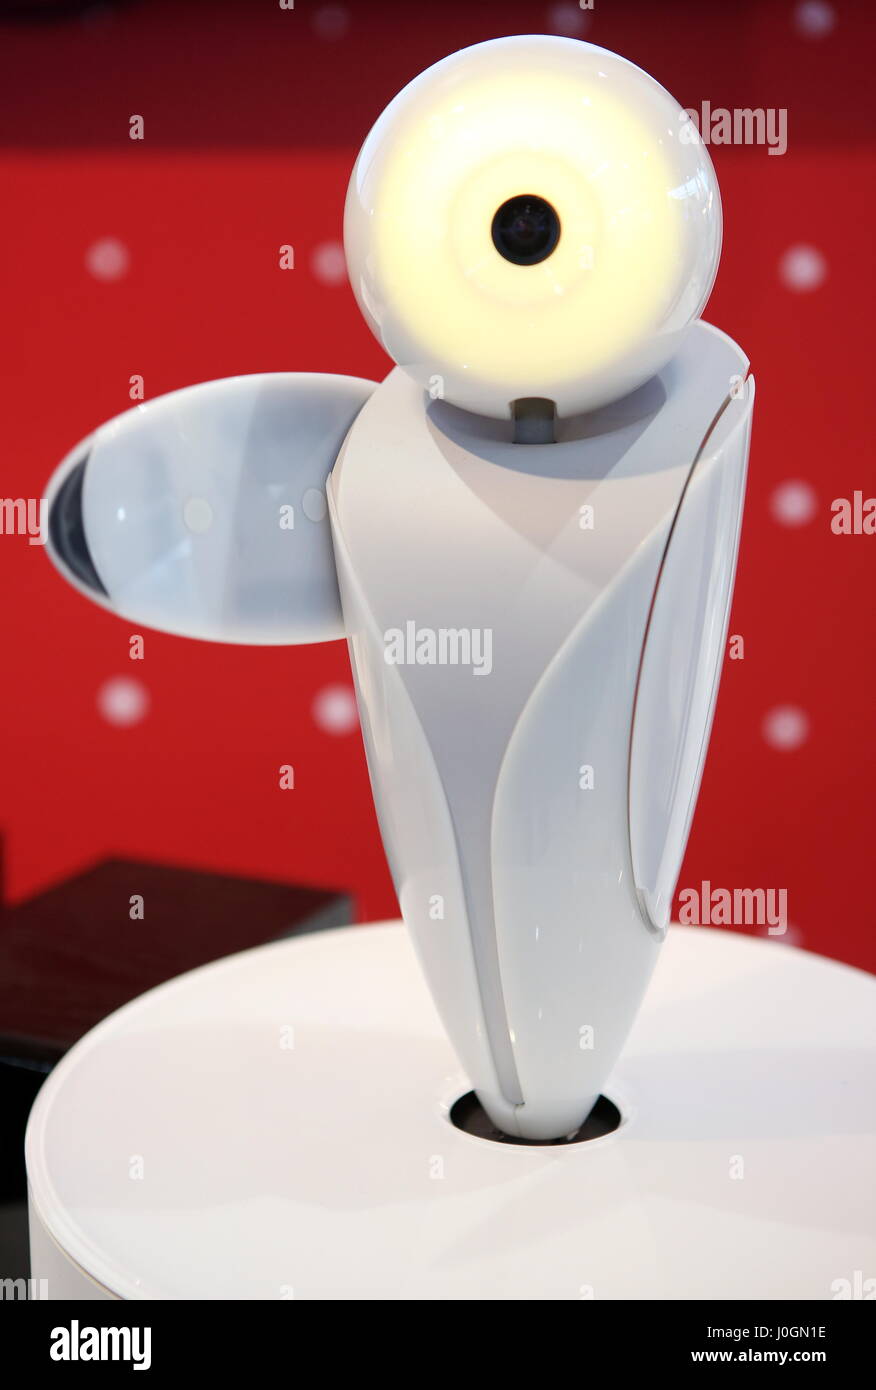 Hanover, Germany. 19th March, 2017. 'RoboPin', talking mediator-robot by Fujitsu with artificial intelligence, e.g. usable in hotels. CeBIT 2017, ICT trade fair, lead theme 'd!conomy - no limits'. Photocredit: Christian Lademann Stock Photo